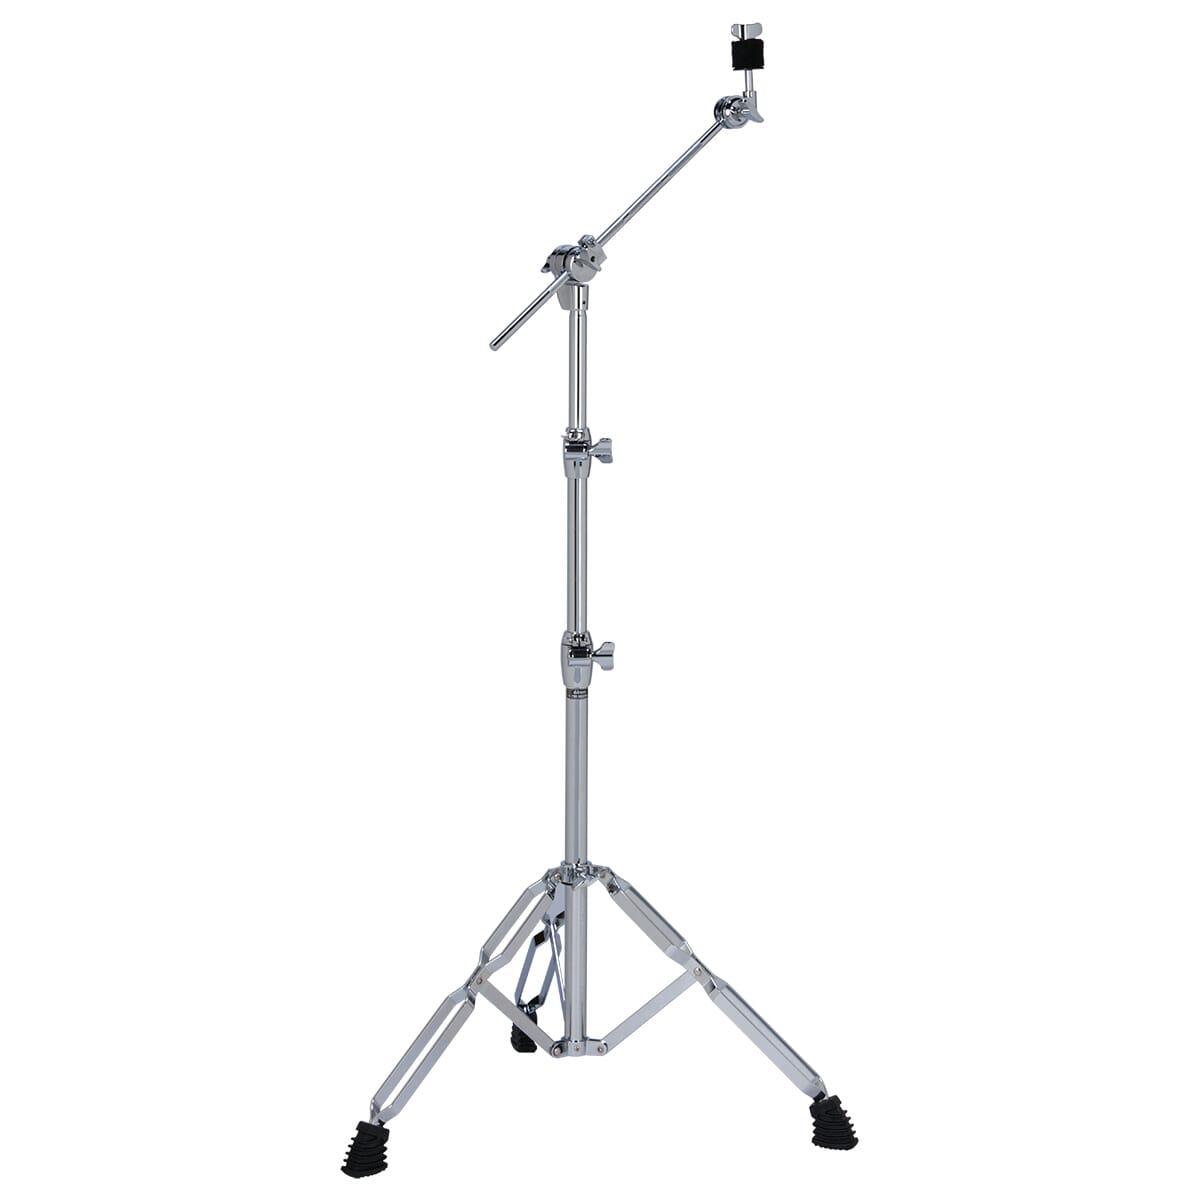 RX PRO series 3 tier cymbal boom stand